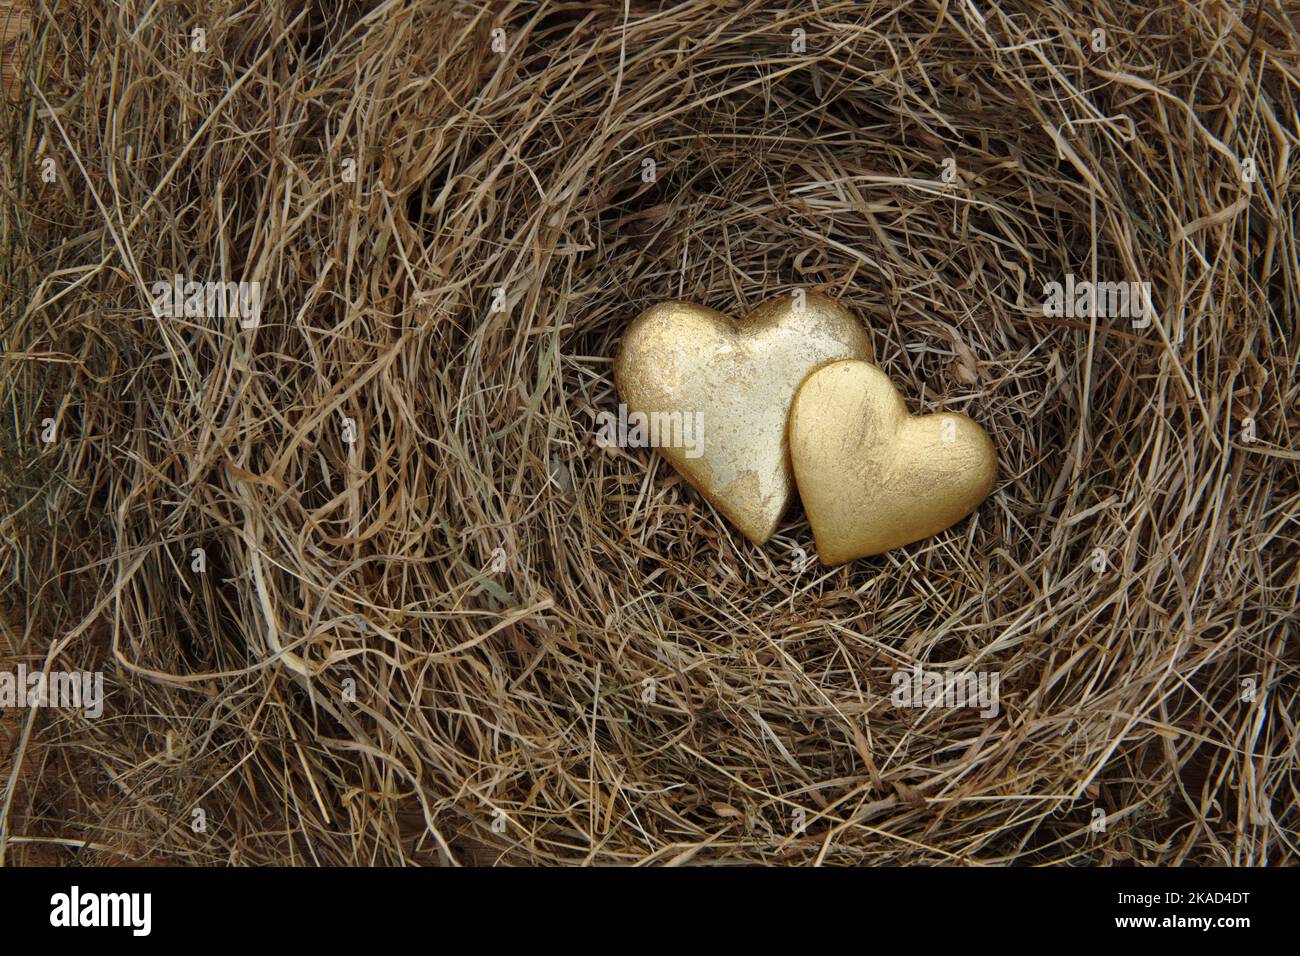 Two gilded hearts in nest of dry grass. Stock Photo